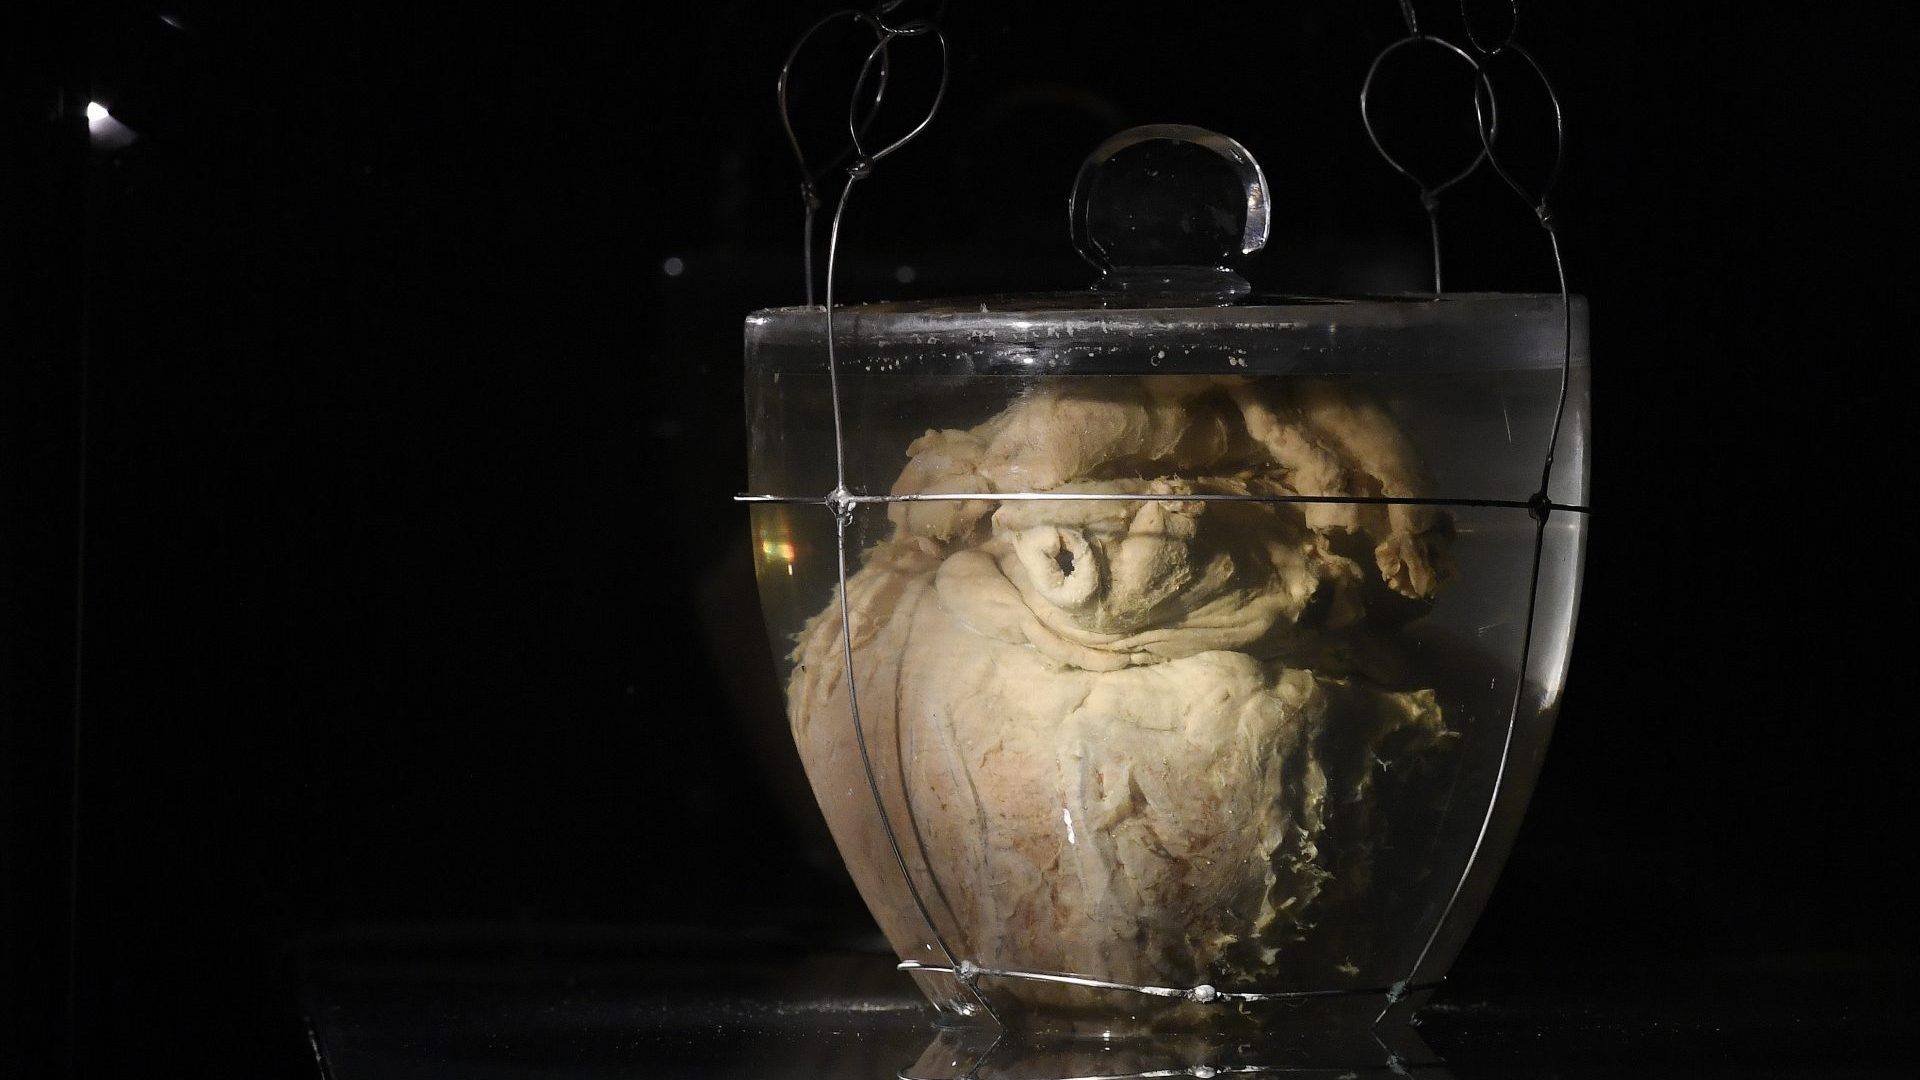 The embalmed heart of Dom Pedro is exhibited at Itamaraty Palace in Brasília on August 24 at the request of the Brazilian president, Jair Bolsonaro. Photo: Mateus Bonomi/Getty Images